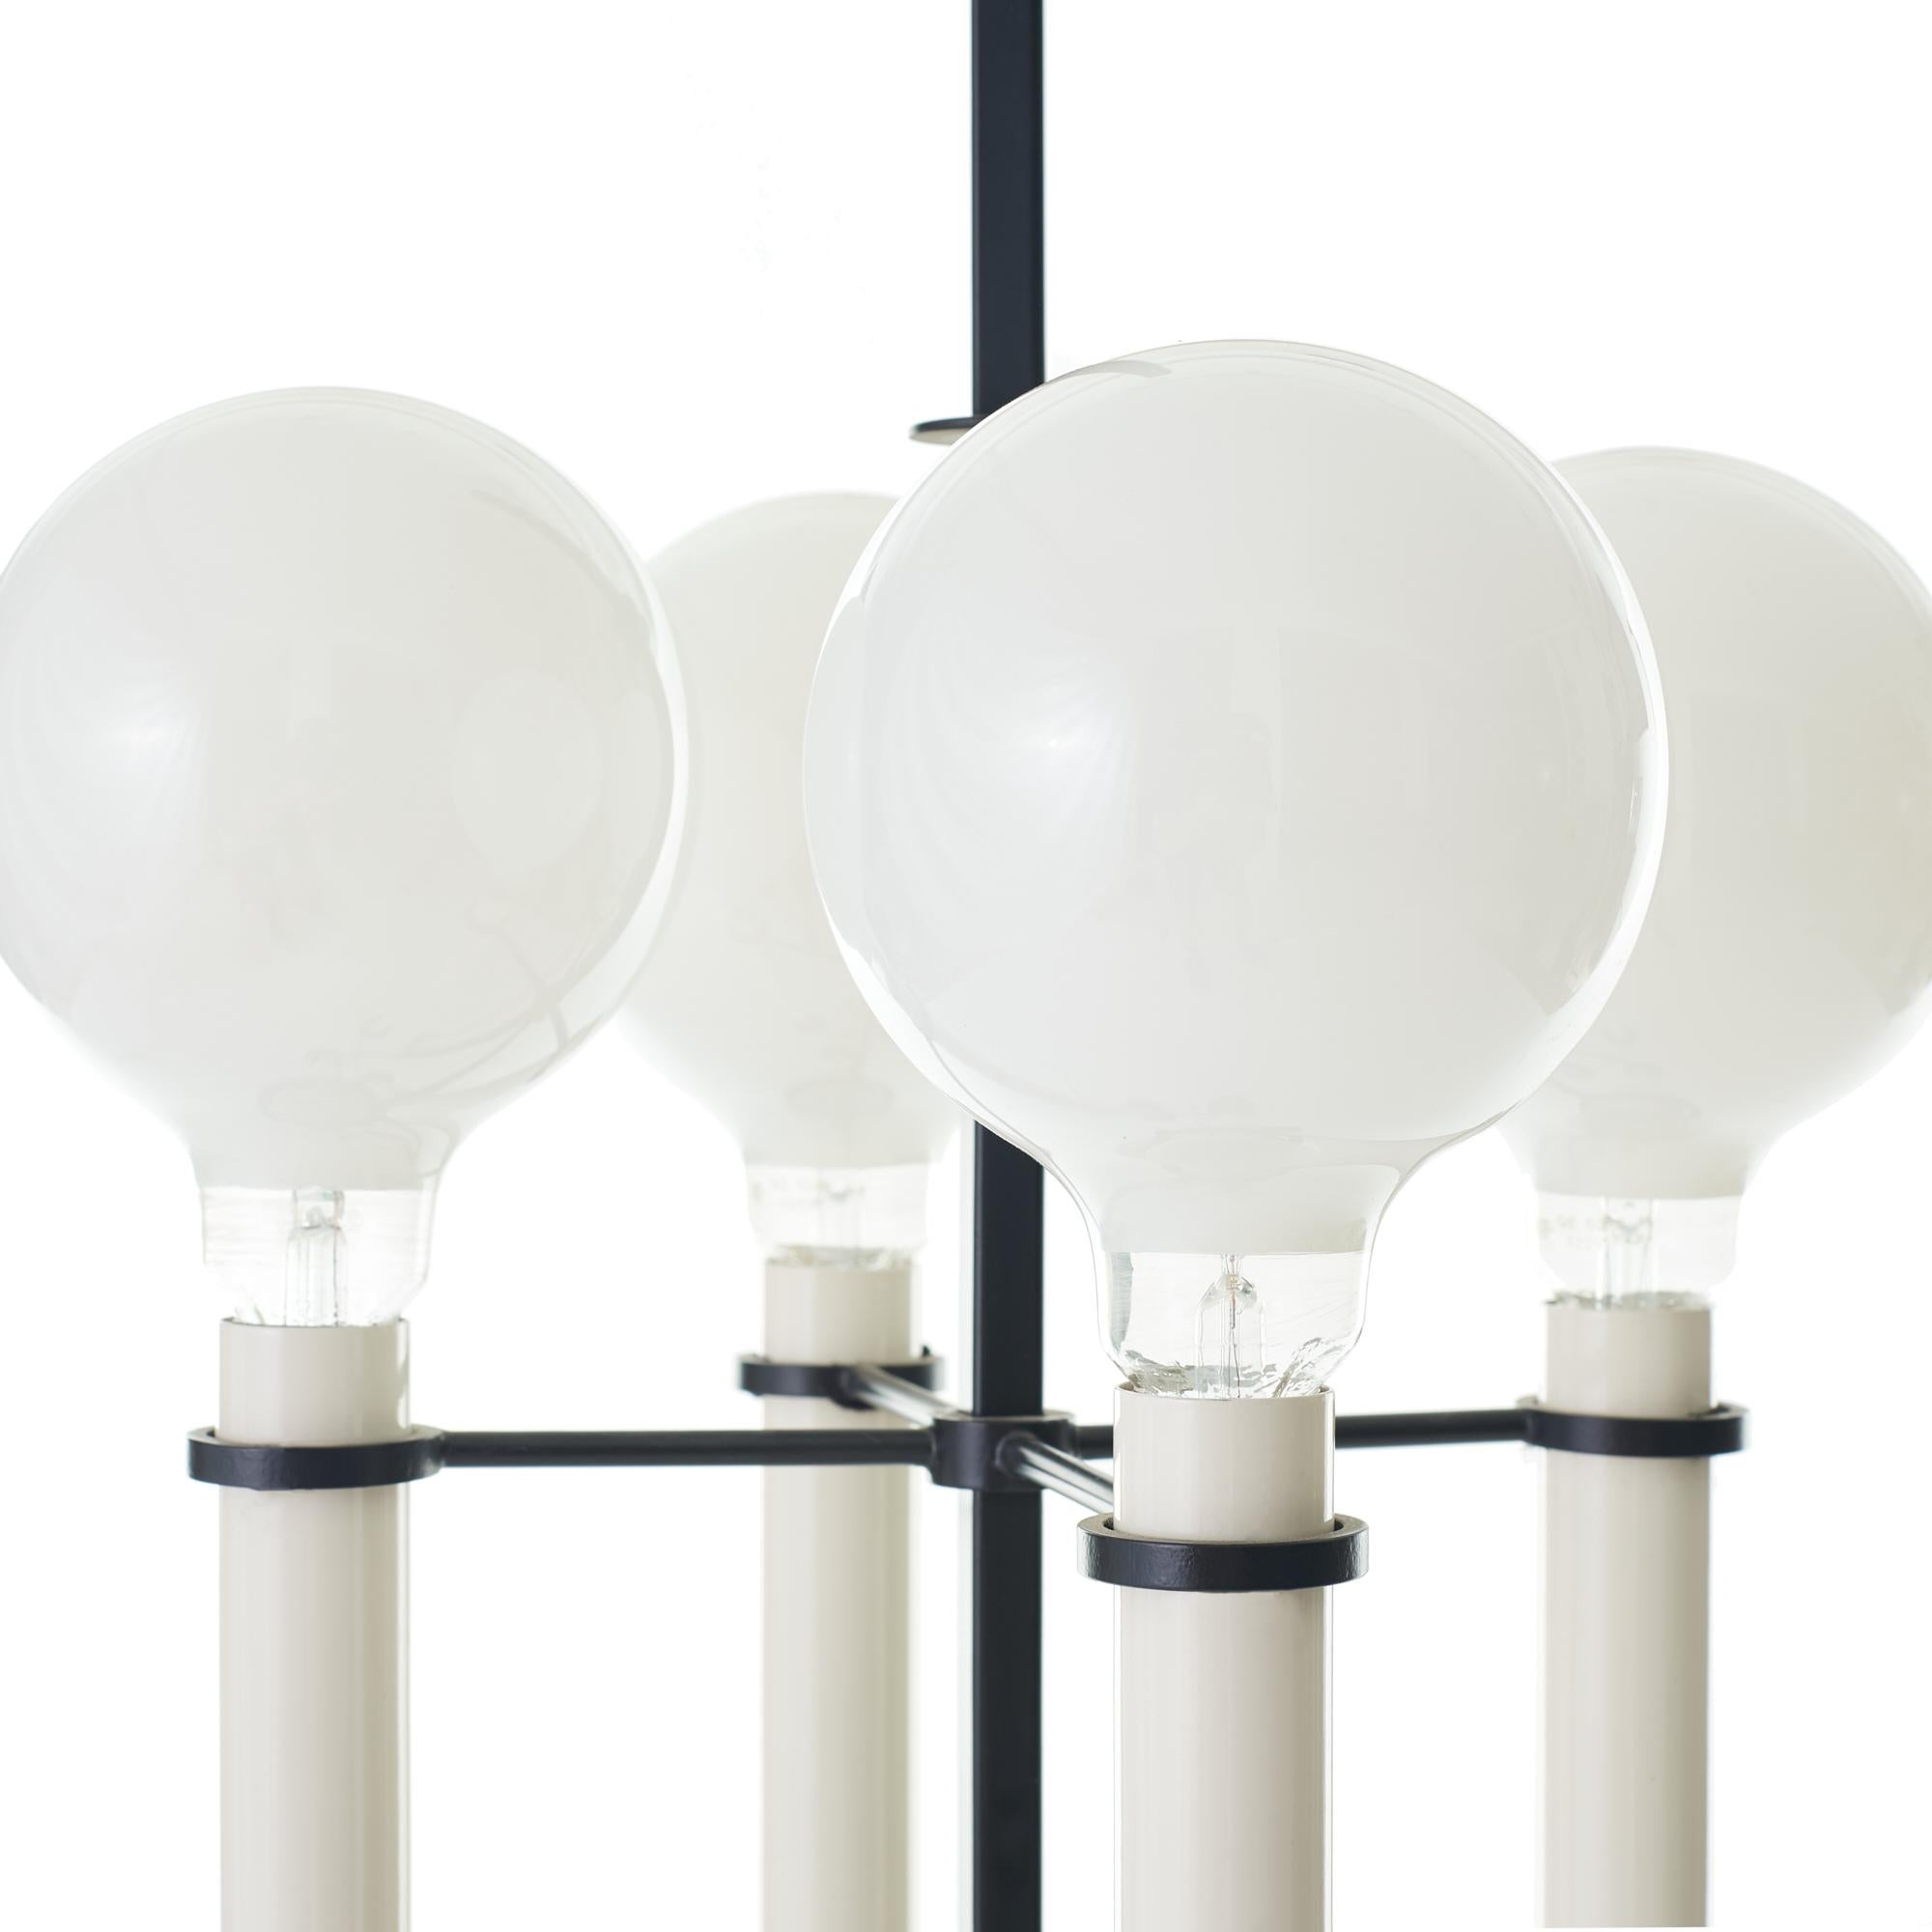 Elegant black steel floor lamp by Tommi Parzinger, circa 1950. Fitted with oversized globe bulbs, though originally this piece would have featured a lampshade. Switch located at base, recently rewired with period-appropriate wrapped